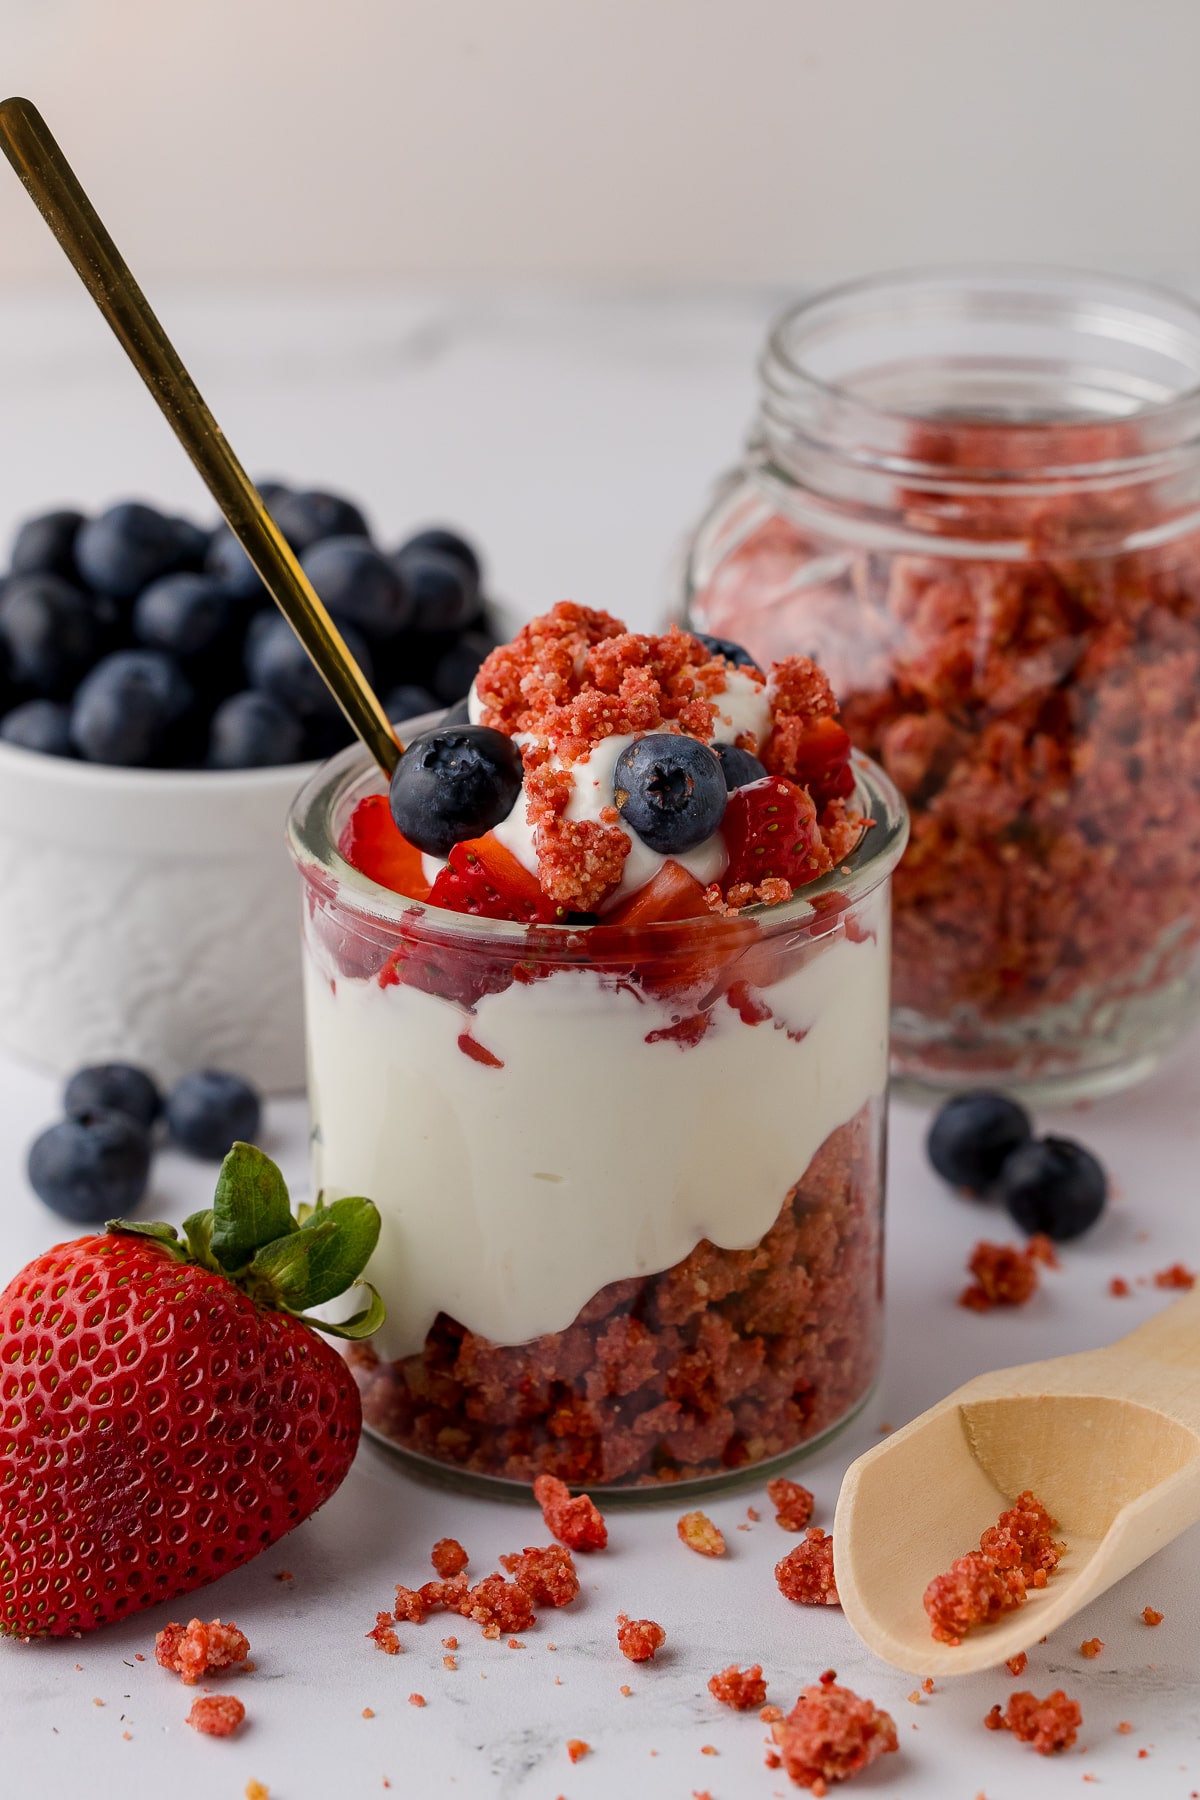 yogurt and fruit parfait with strawberry crunch in the background, fresh strawberries, and a bowl of blueberries